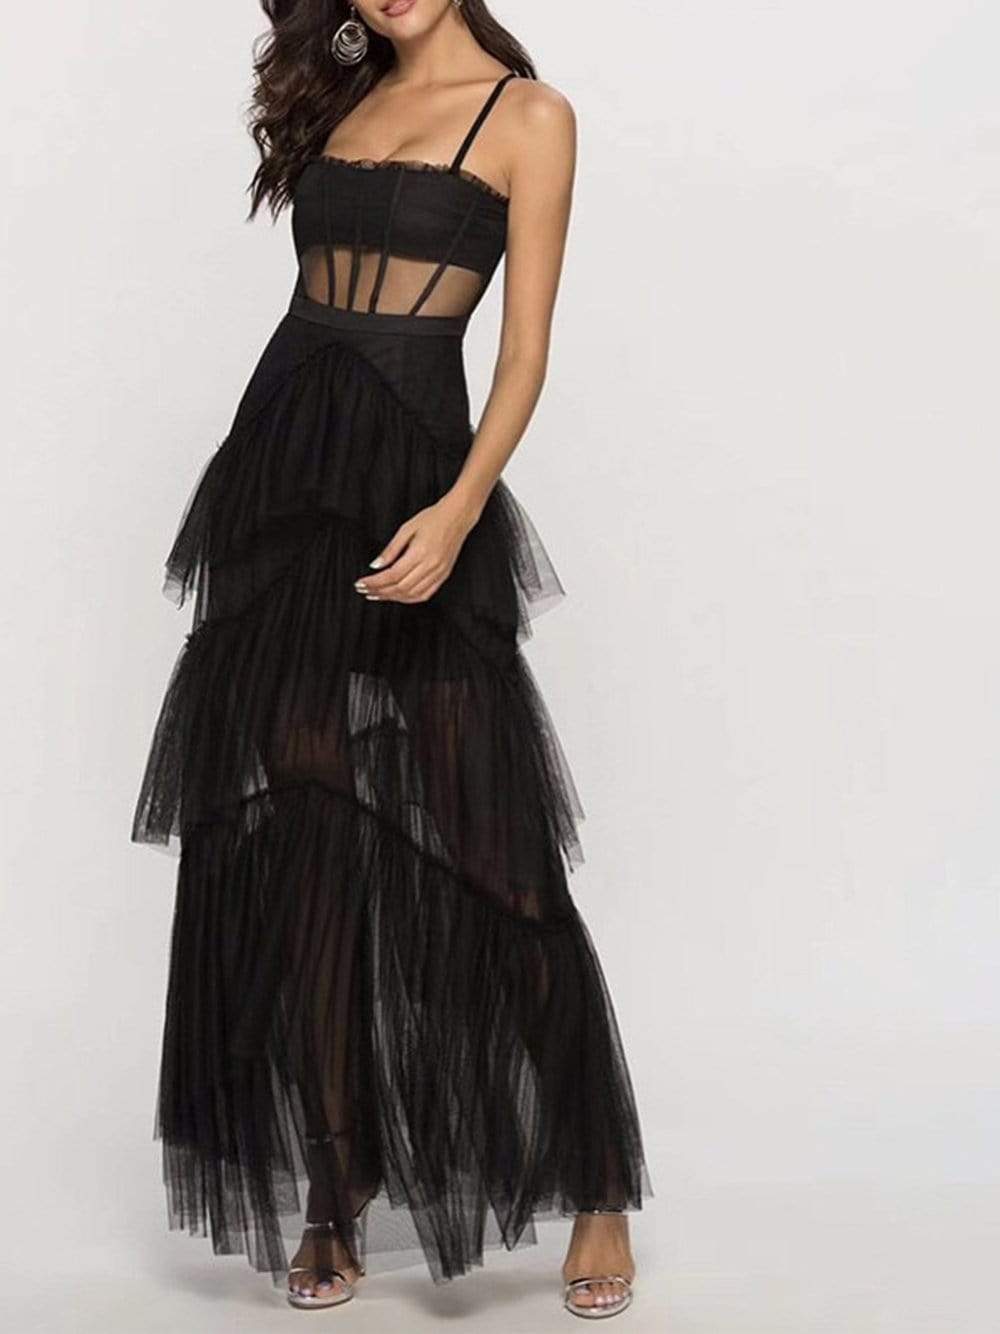 DIDA Tulle Dress in Black